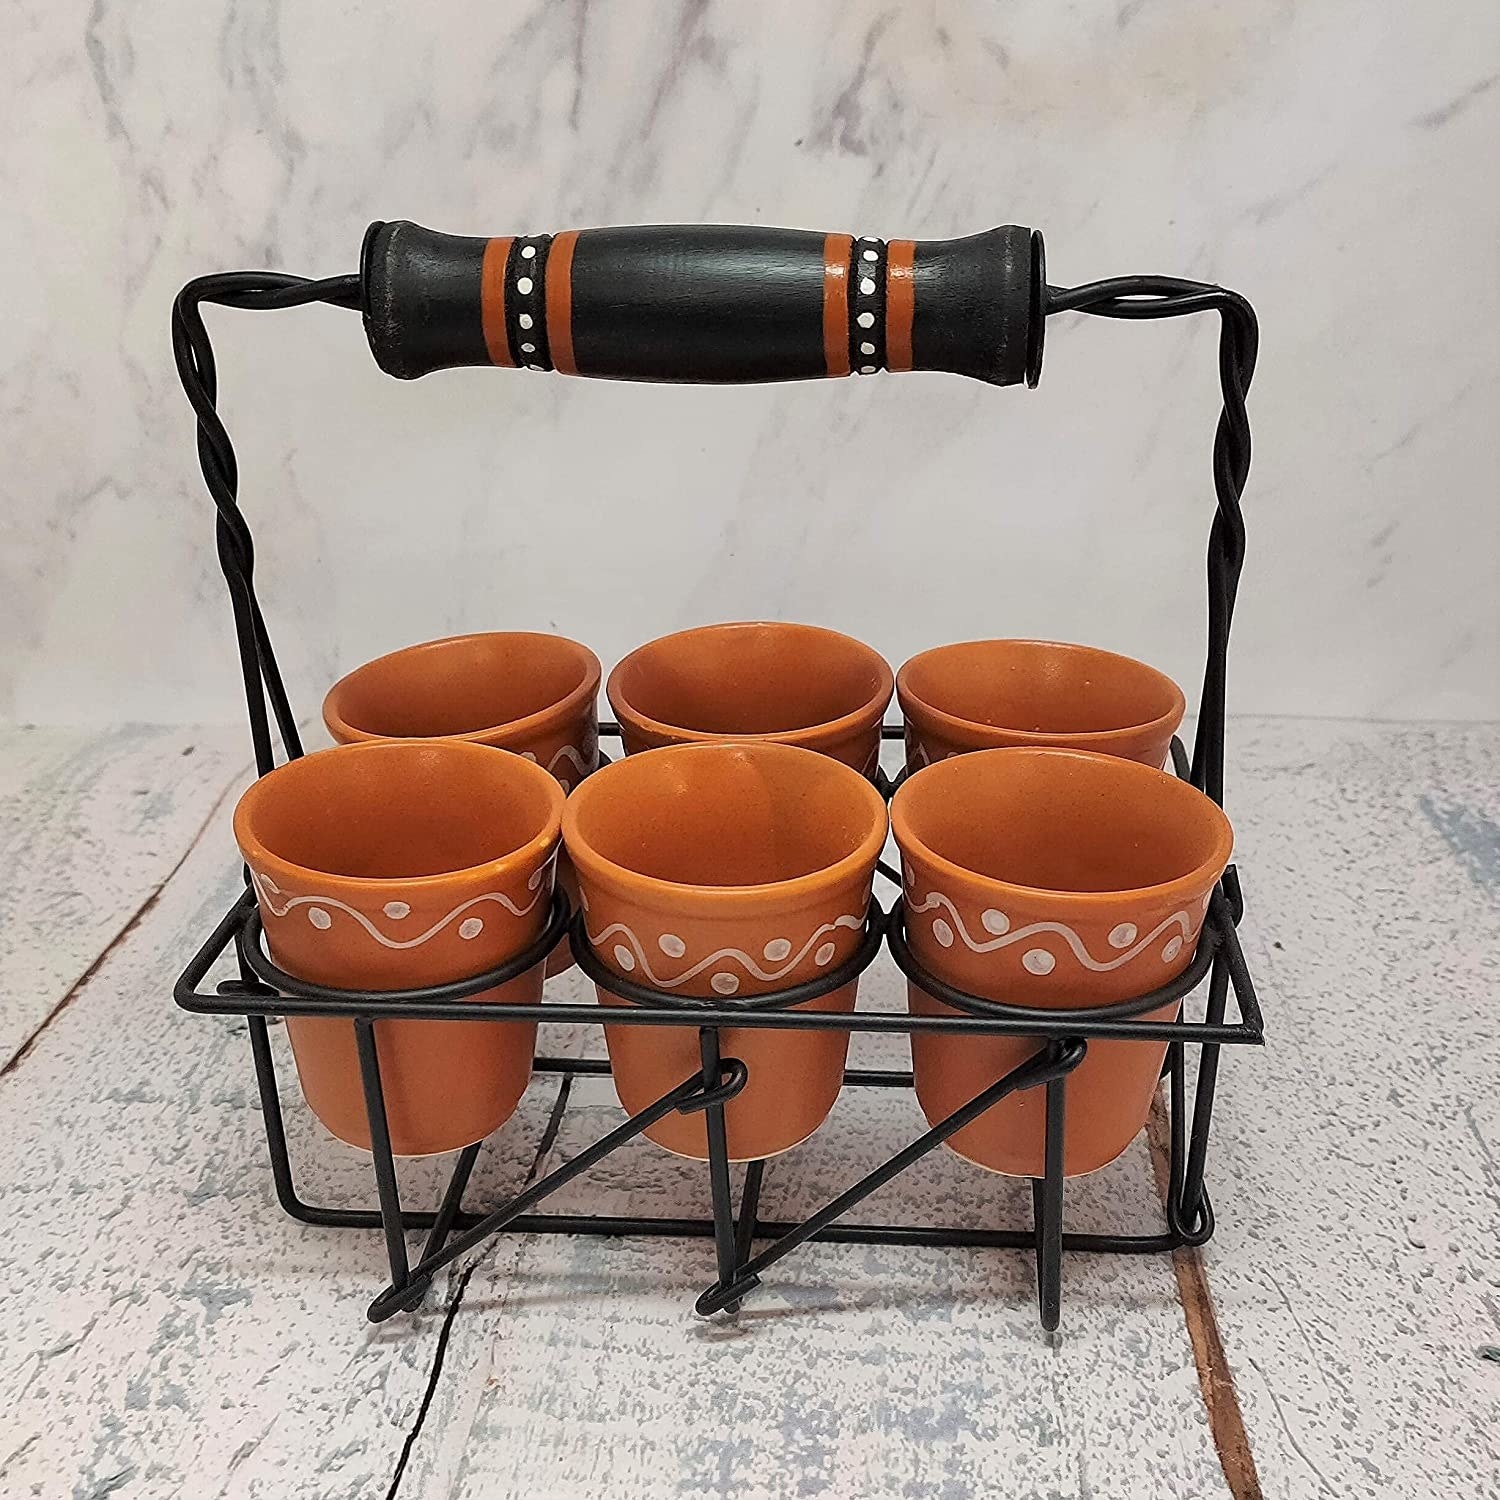 A cutting chai holder with cups in it